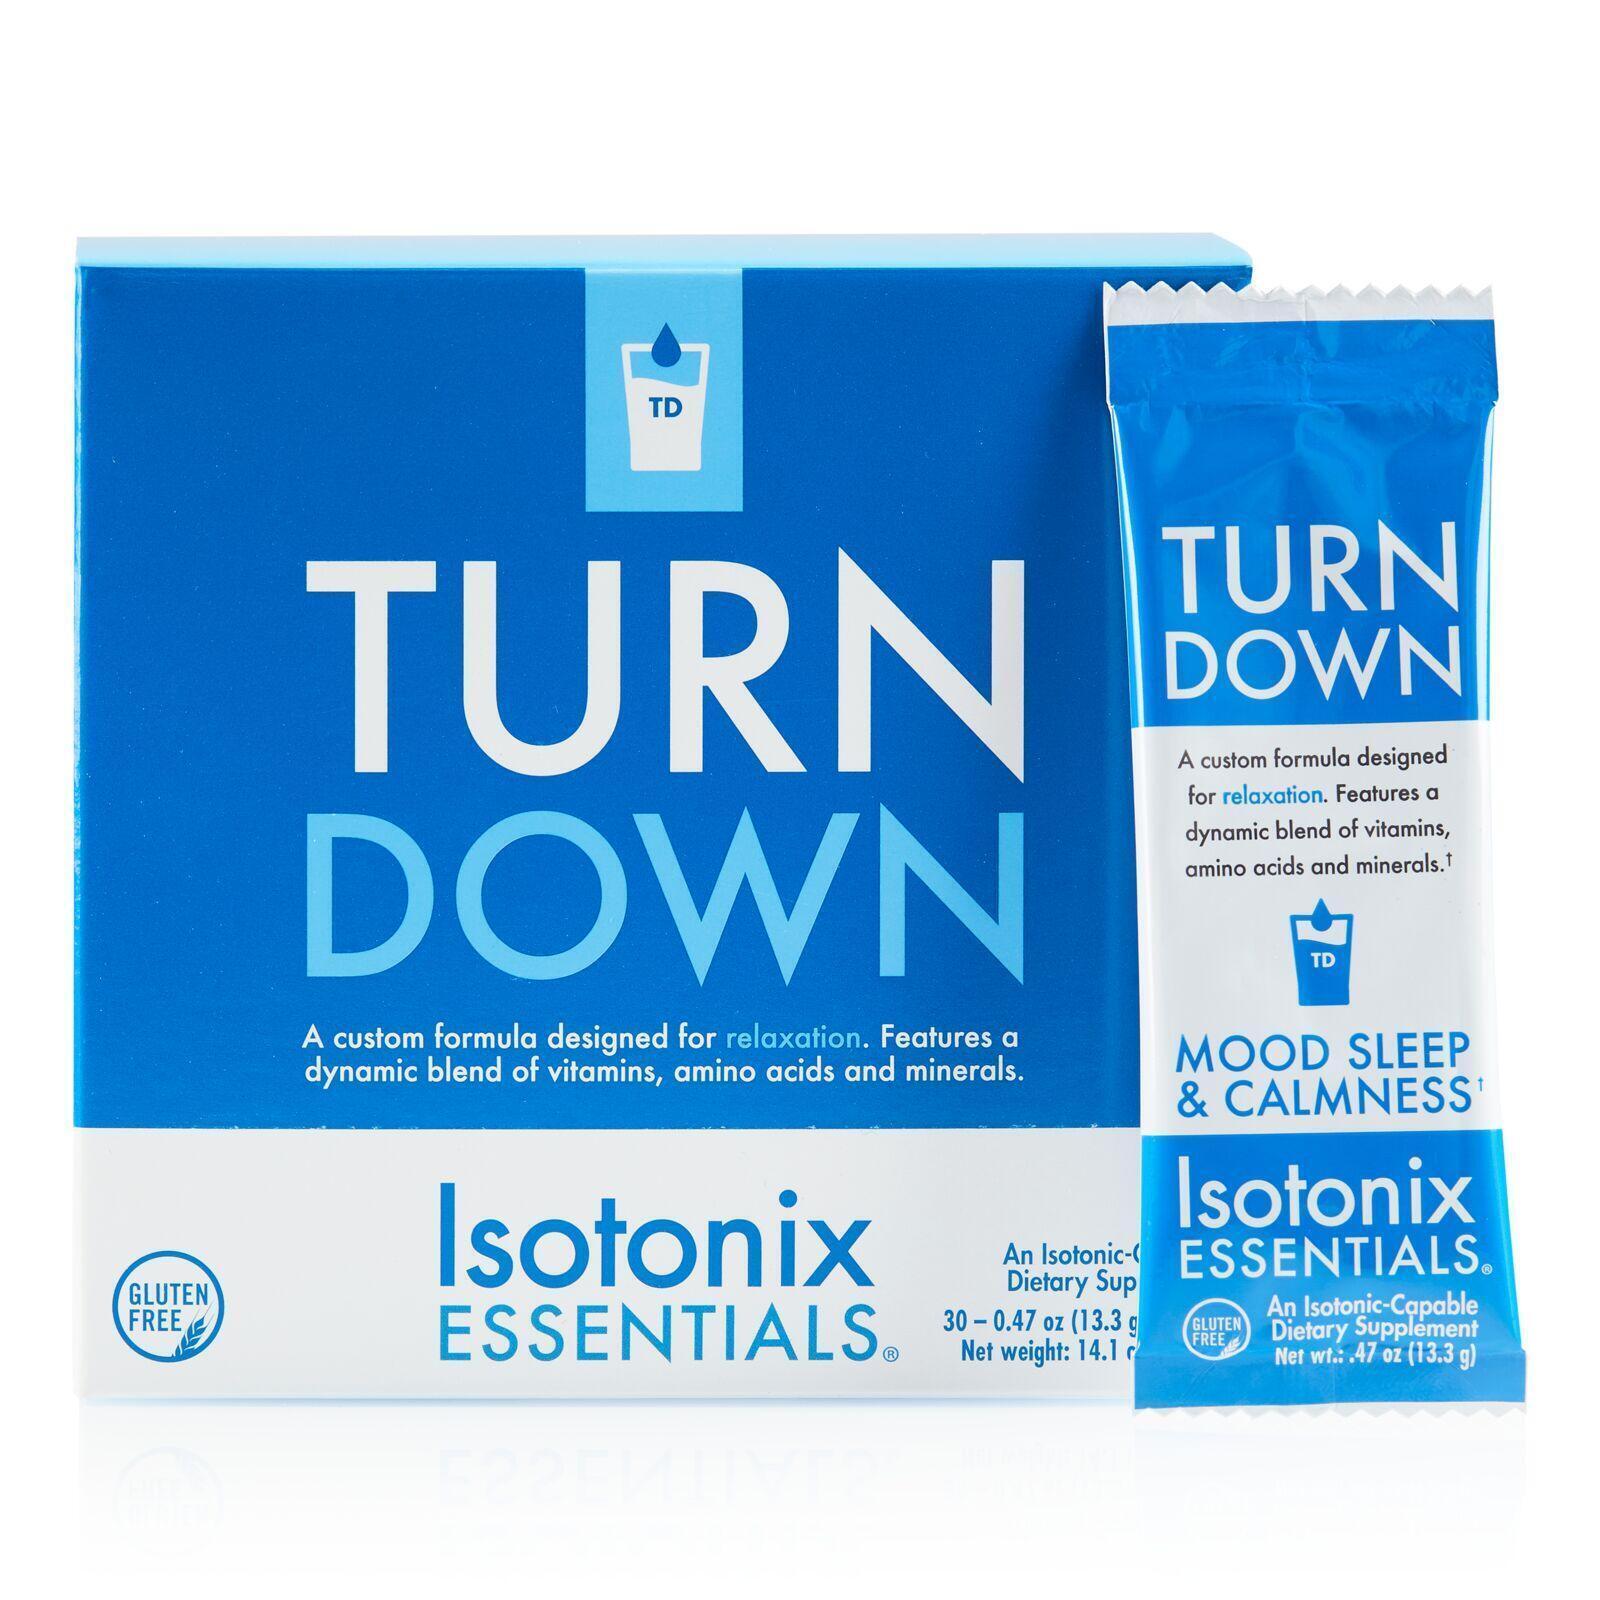 Isotonix Essentials Turn Down,Vegan, Product Tested no detectable GMO 